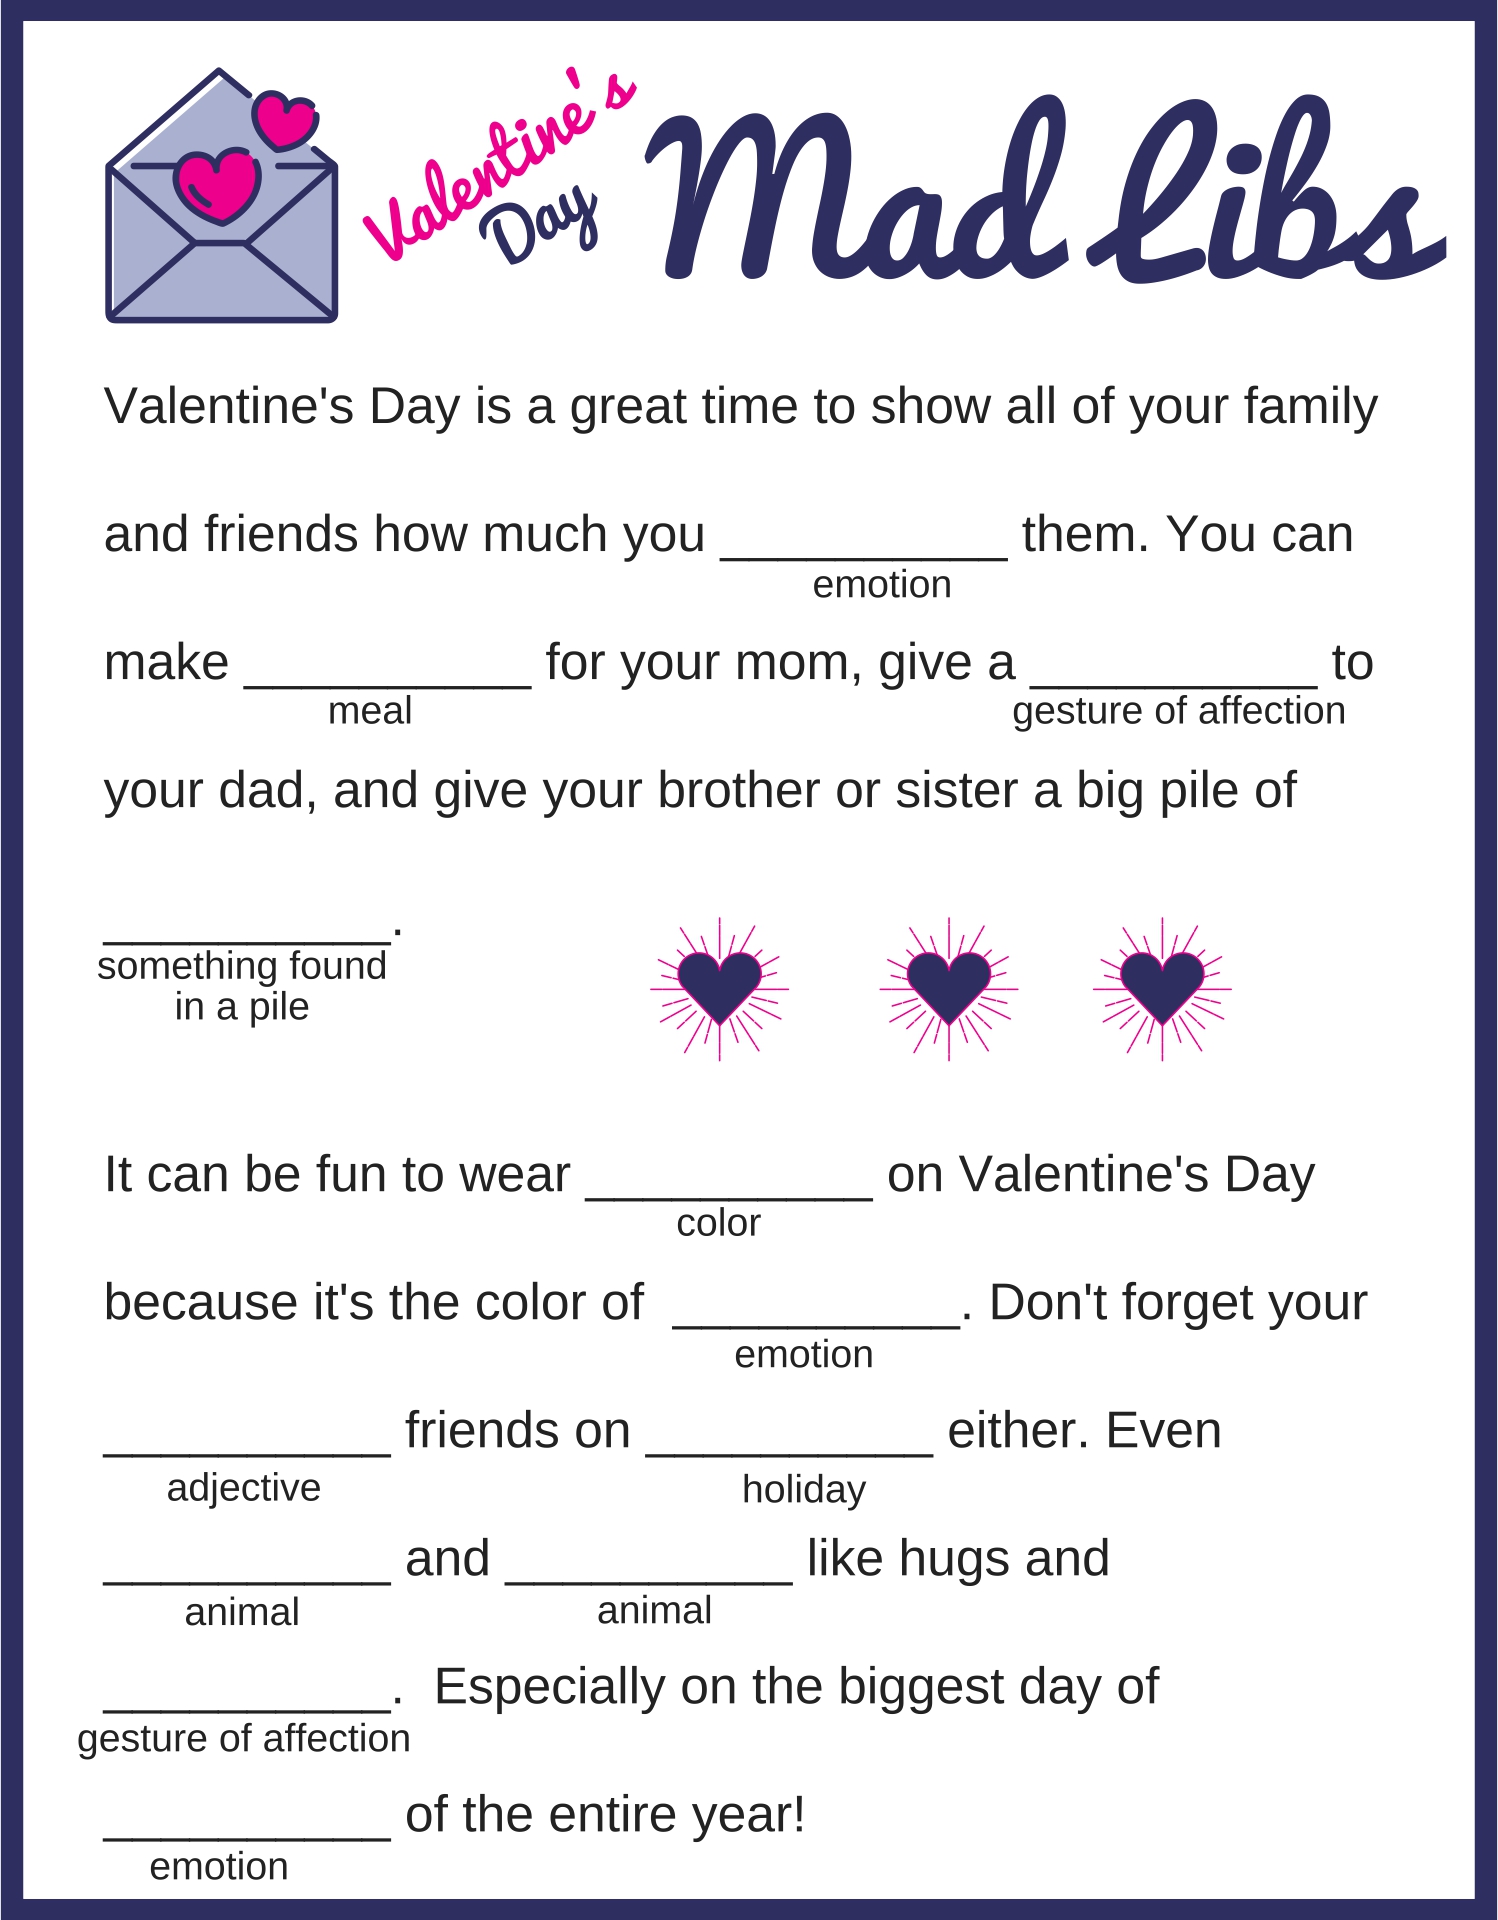 10-best-love-letter-mad-libs-printable-pdf-for-free-at-printablee